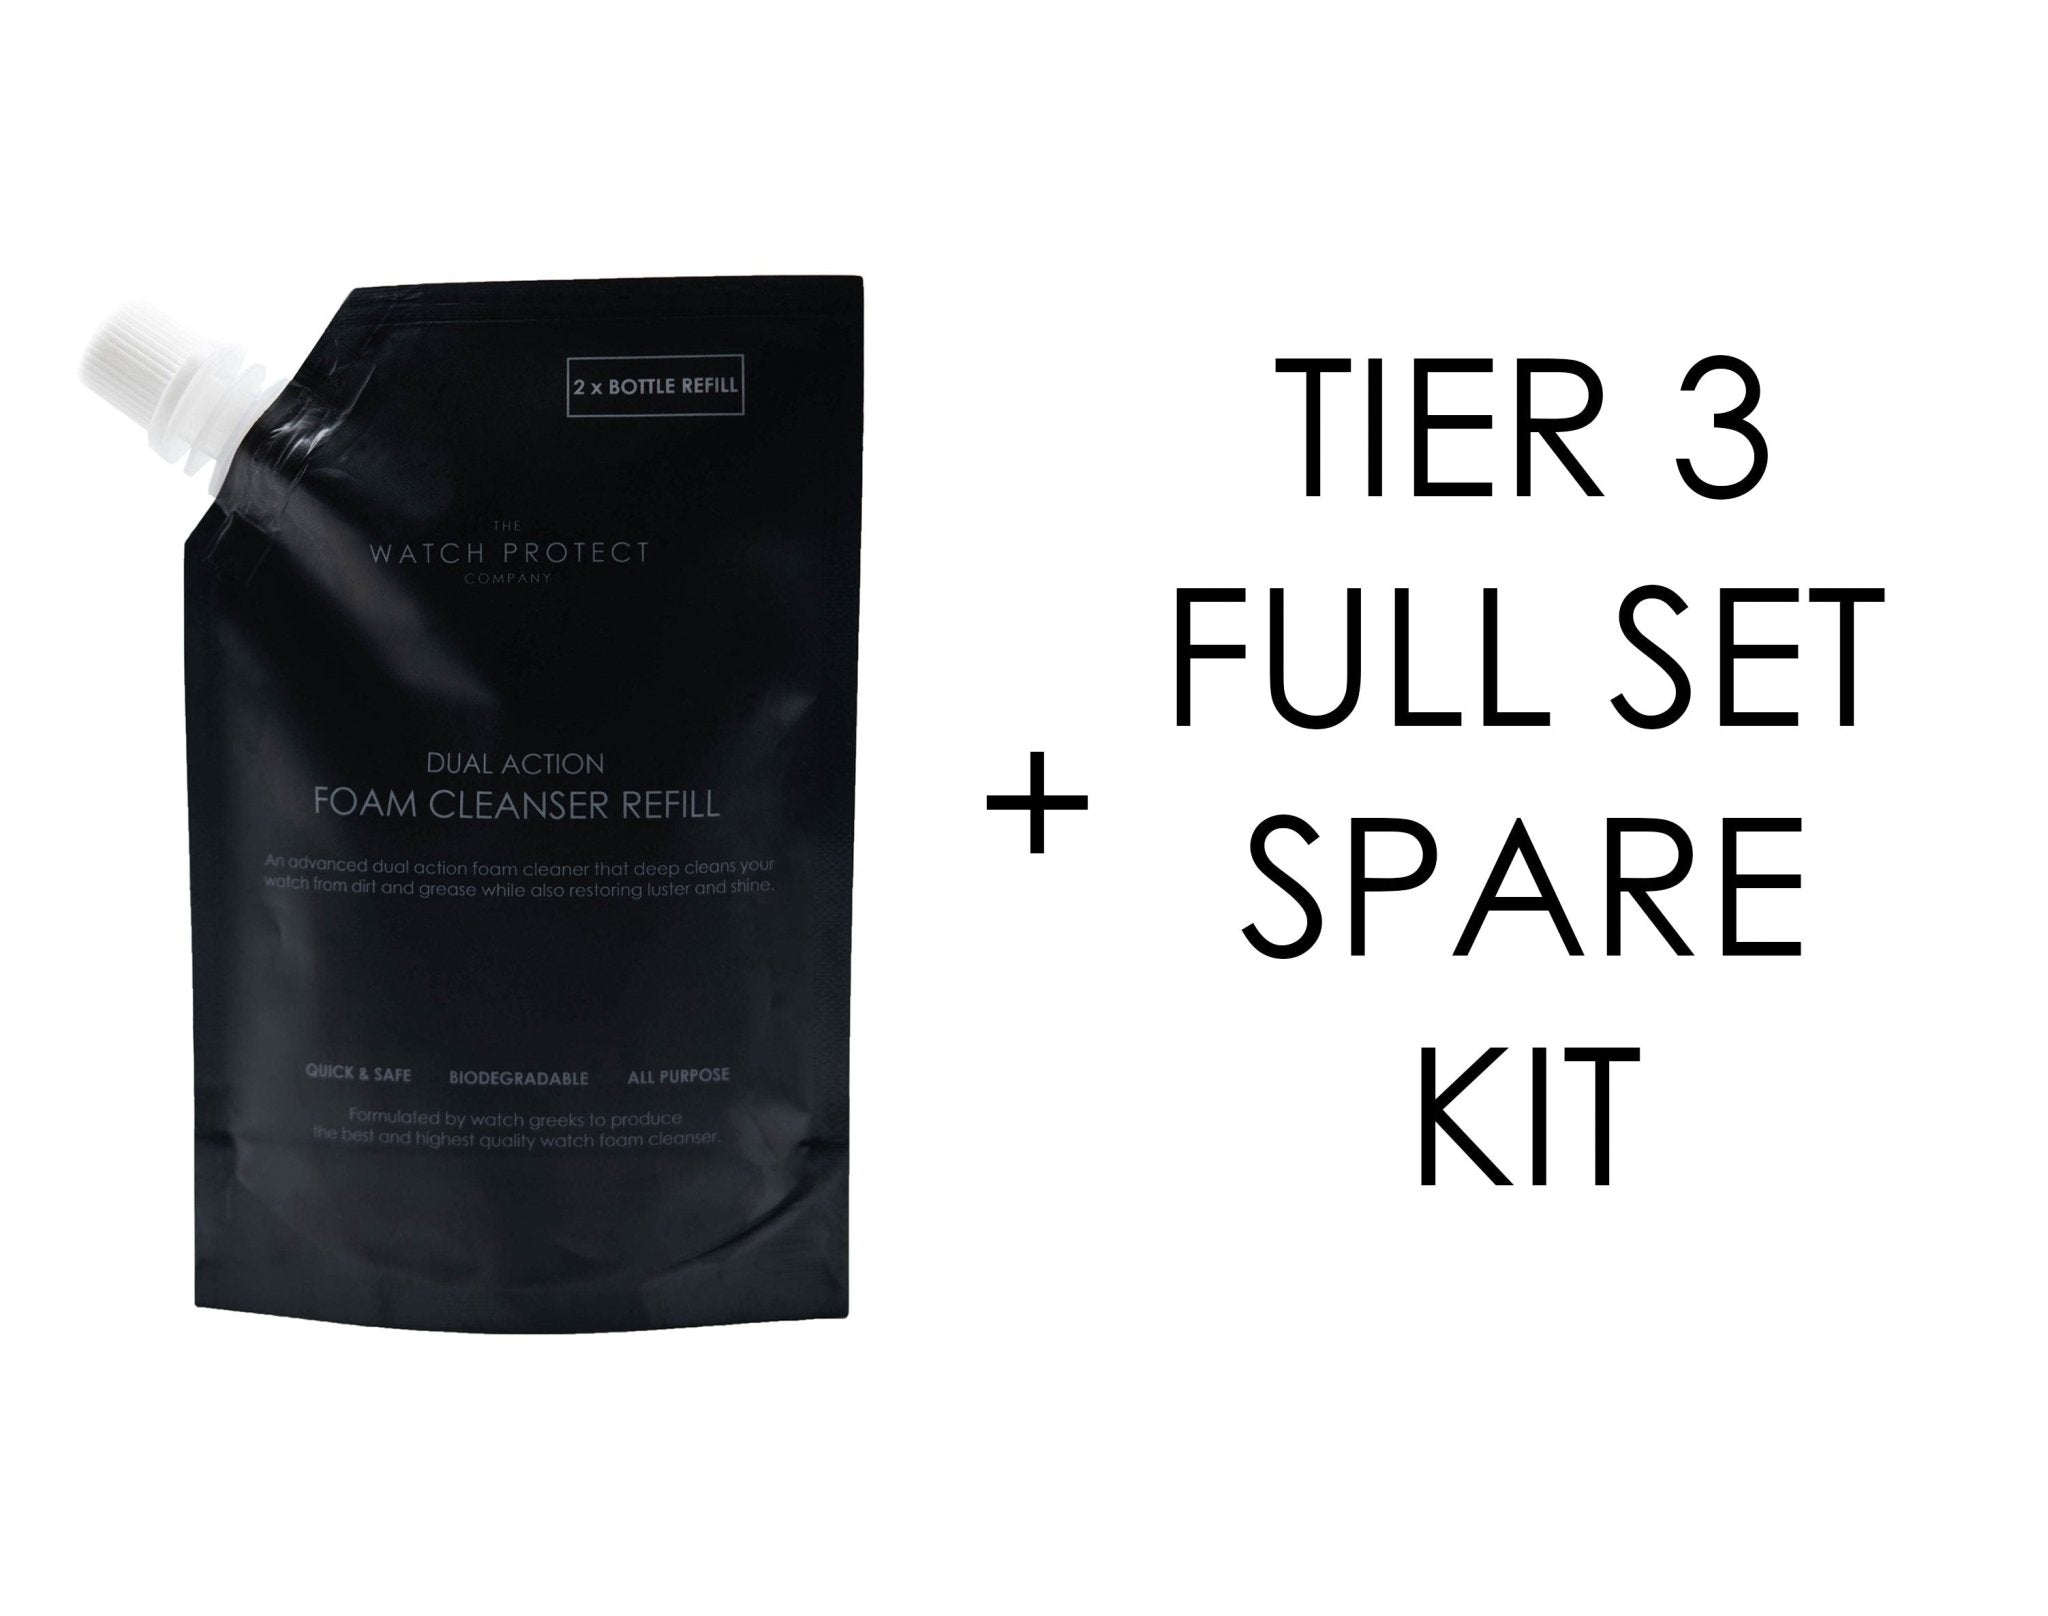 Refill Pouch + Tier 3 Spare Kit - The Watch Protect Company